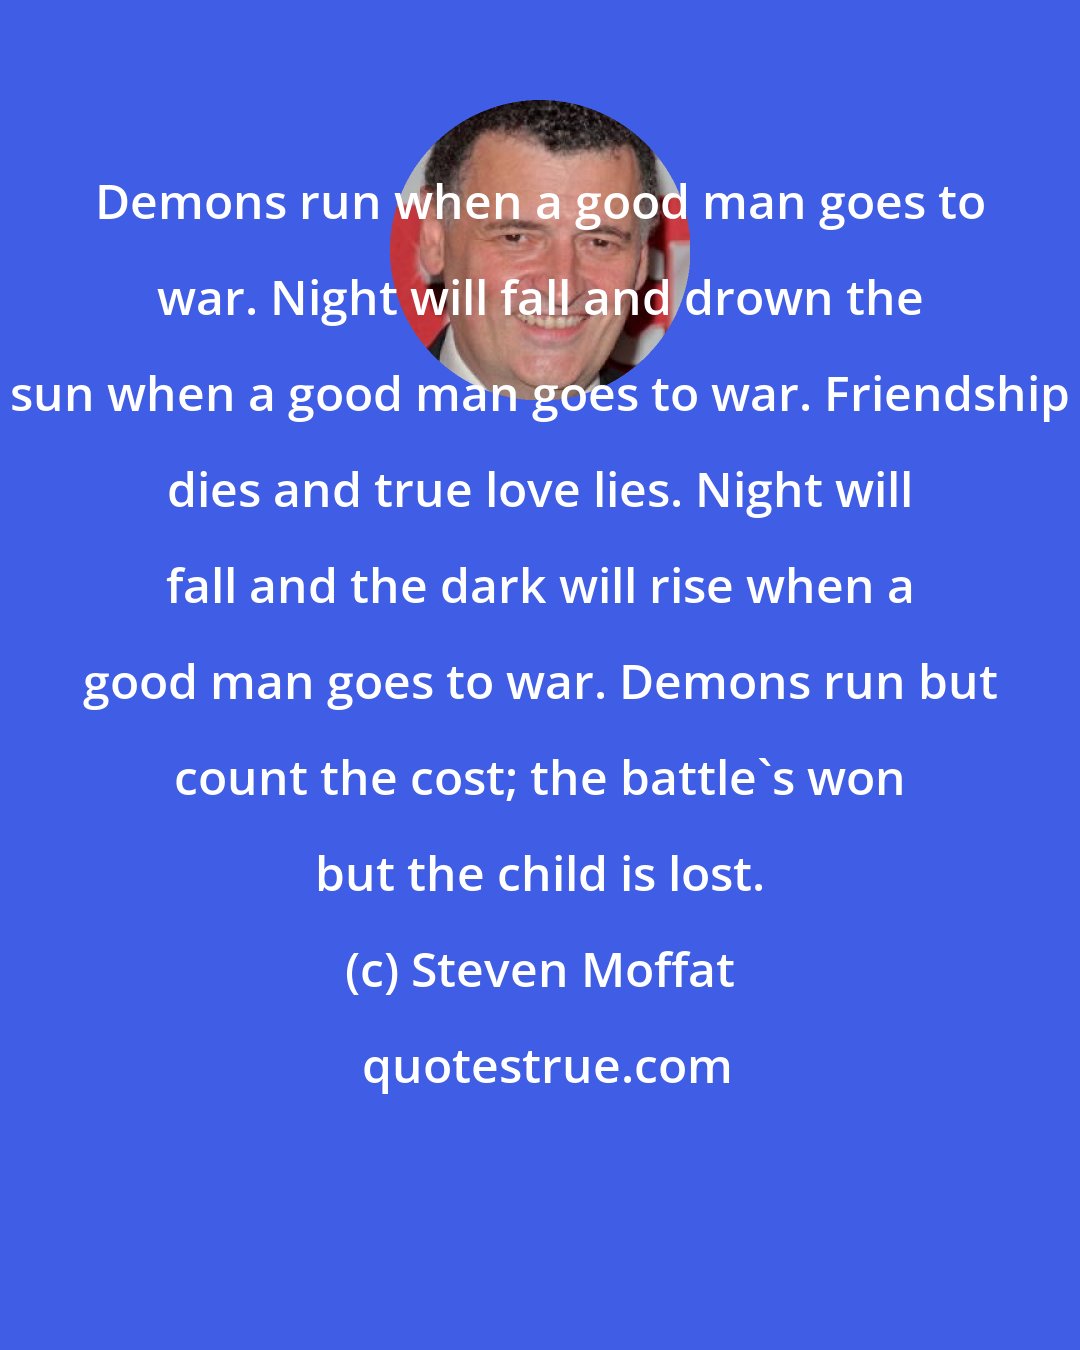 Steven Moffat: Demons run when a good man goes to war. Night will fall and drown the sun when a good man goes to war. Friendship dies and true love lies. Night will fall and the dark will rise when a good man goes to war. Demons run but count the cost; the battle's won but the child is lost.